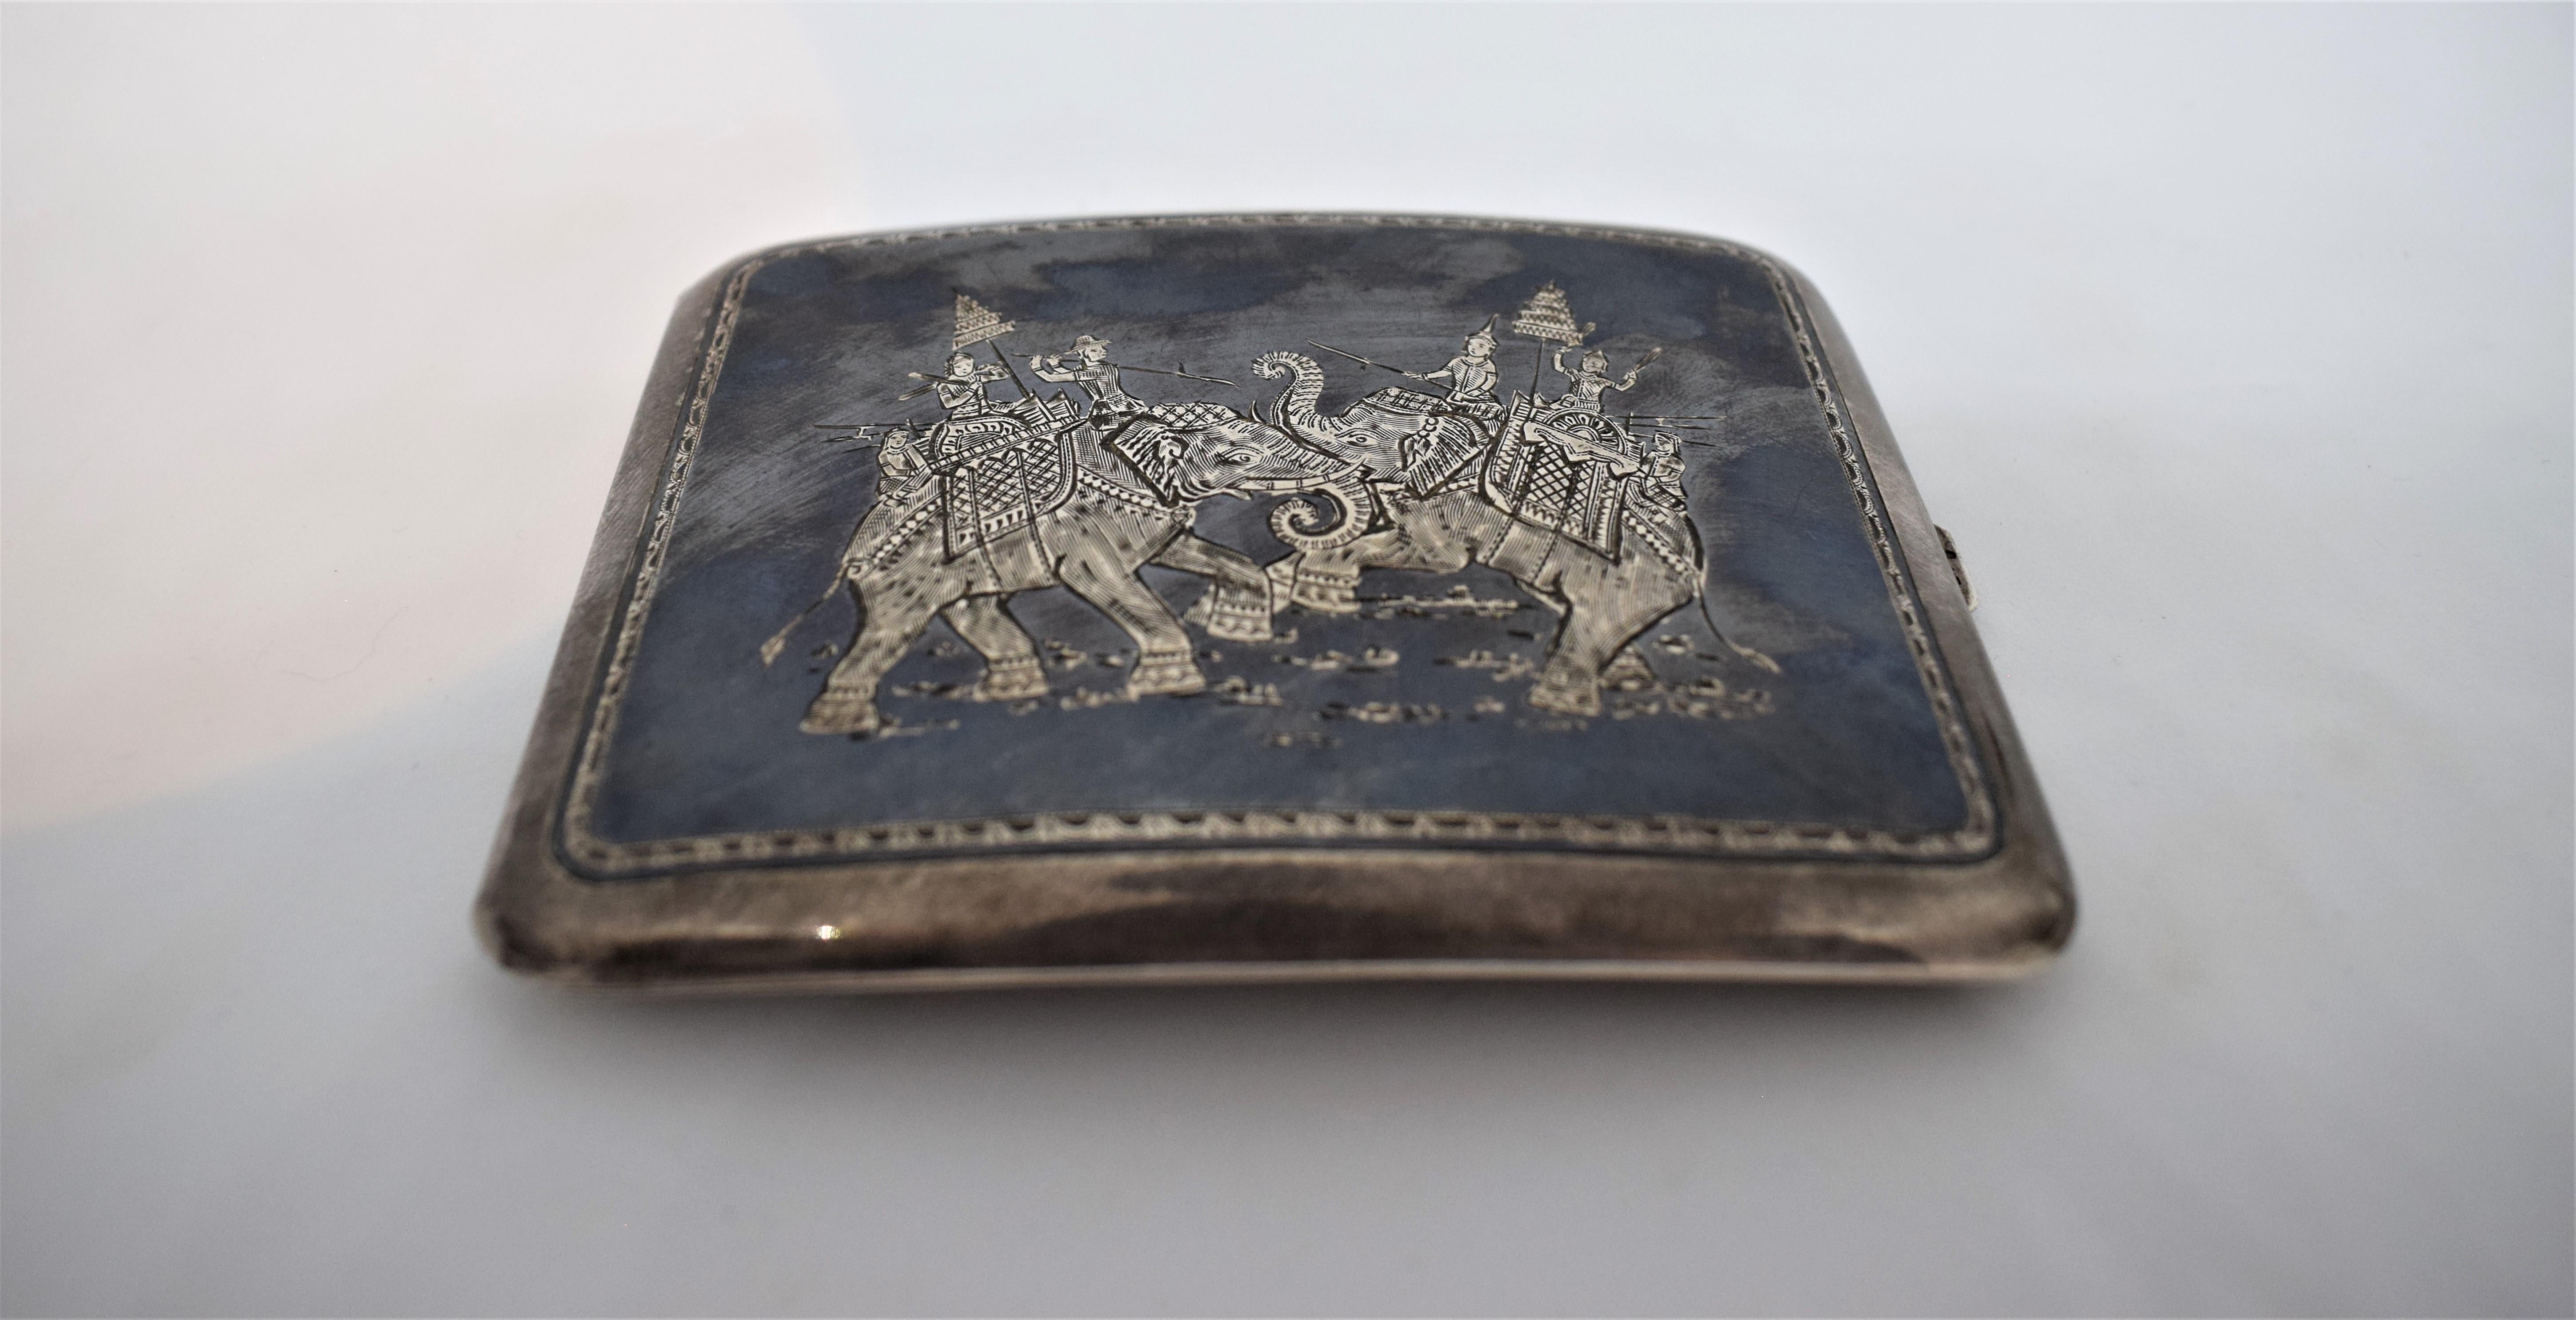 Burmese silver pocket cigarette case, late 19th century.

This well-crafted box is typical of Burmese work for the Anglo-colonial market in the pre-WWI period. The slightly-domed, hinged lid is decorated with an engraved image depicting the mighty